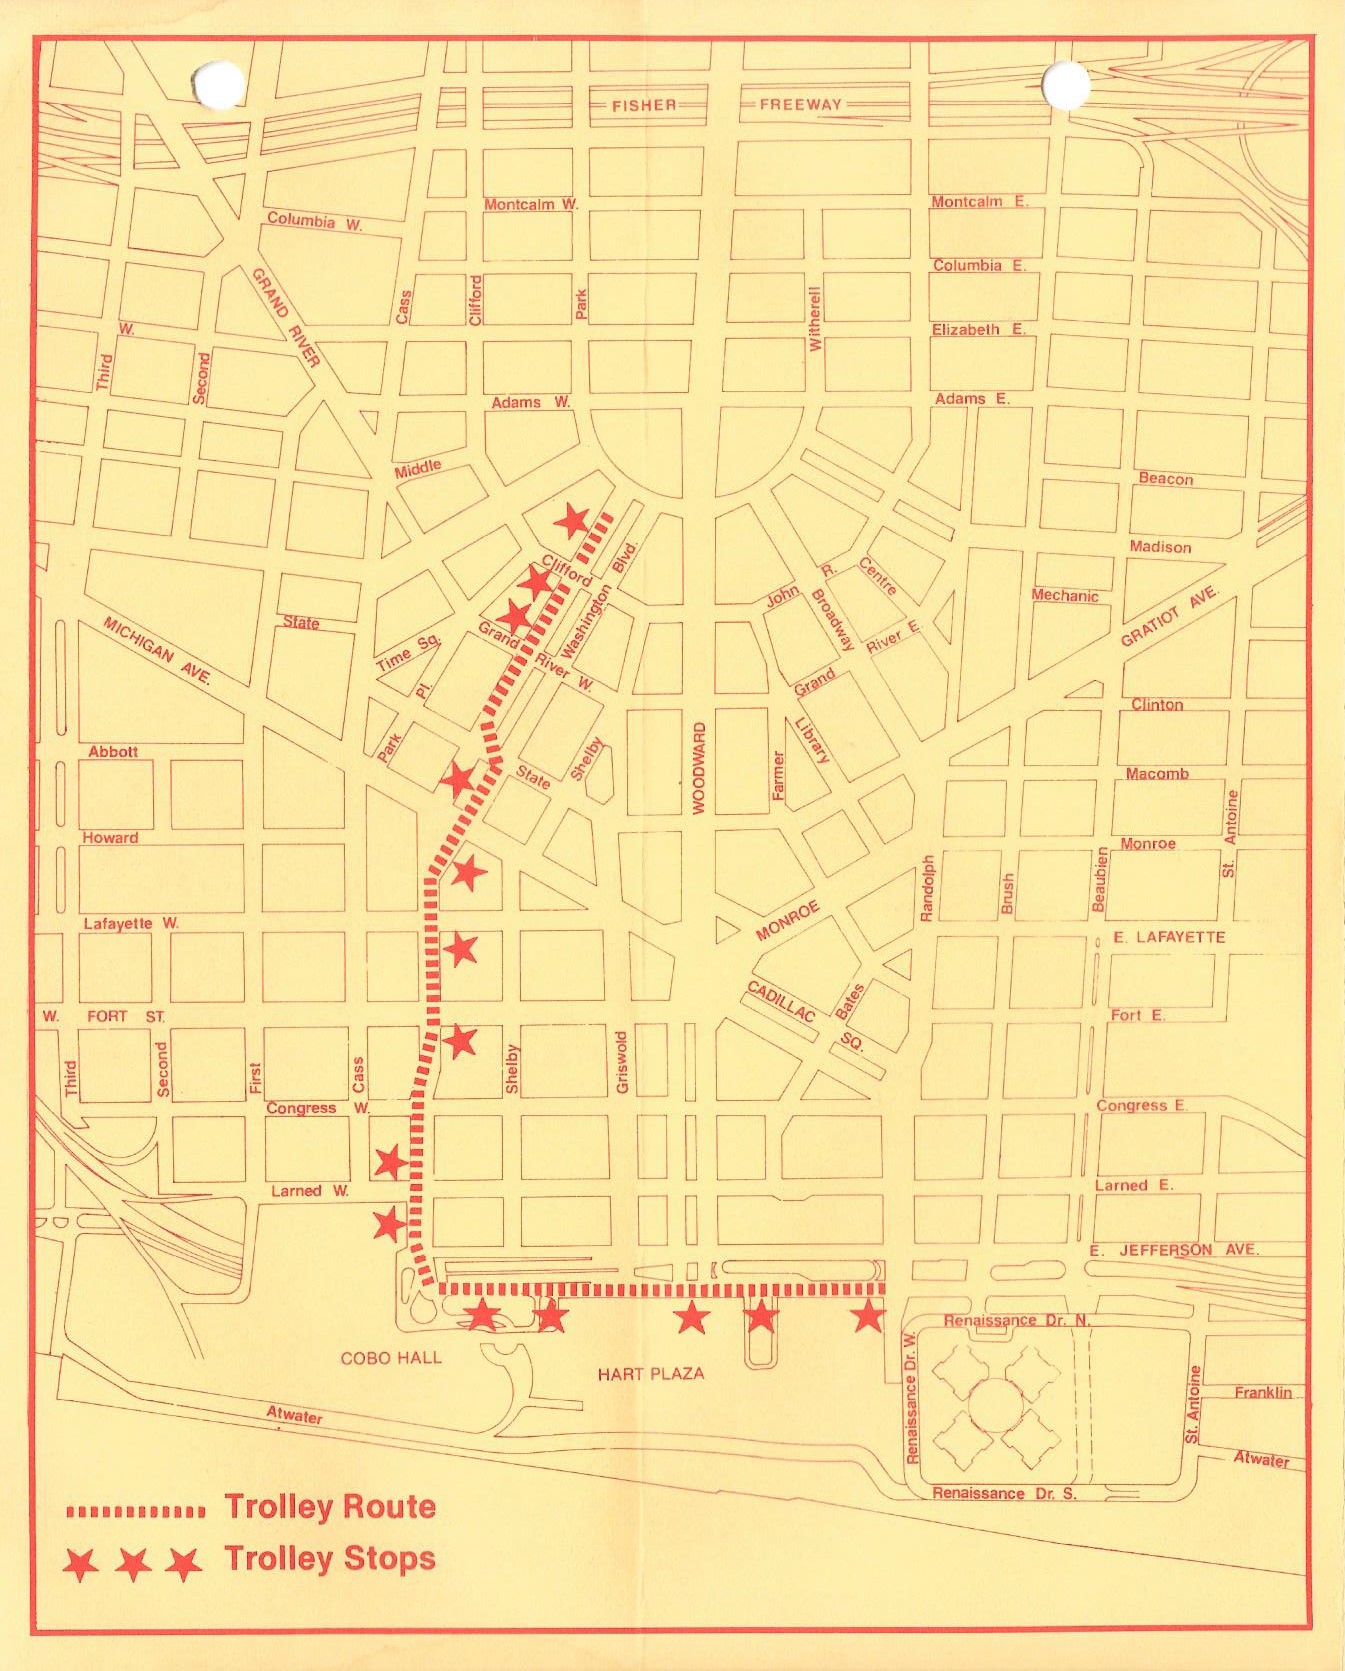 Downtown Trolley 1980s map